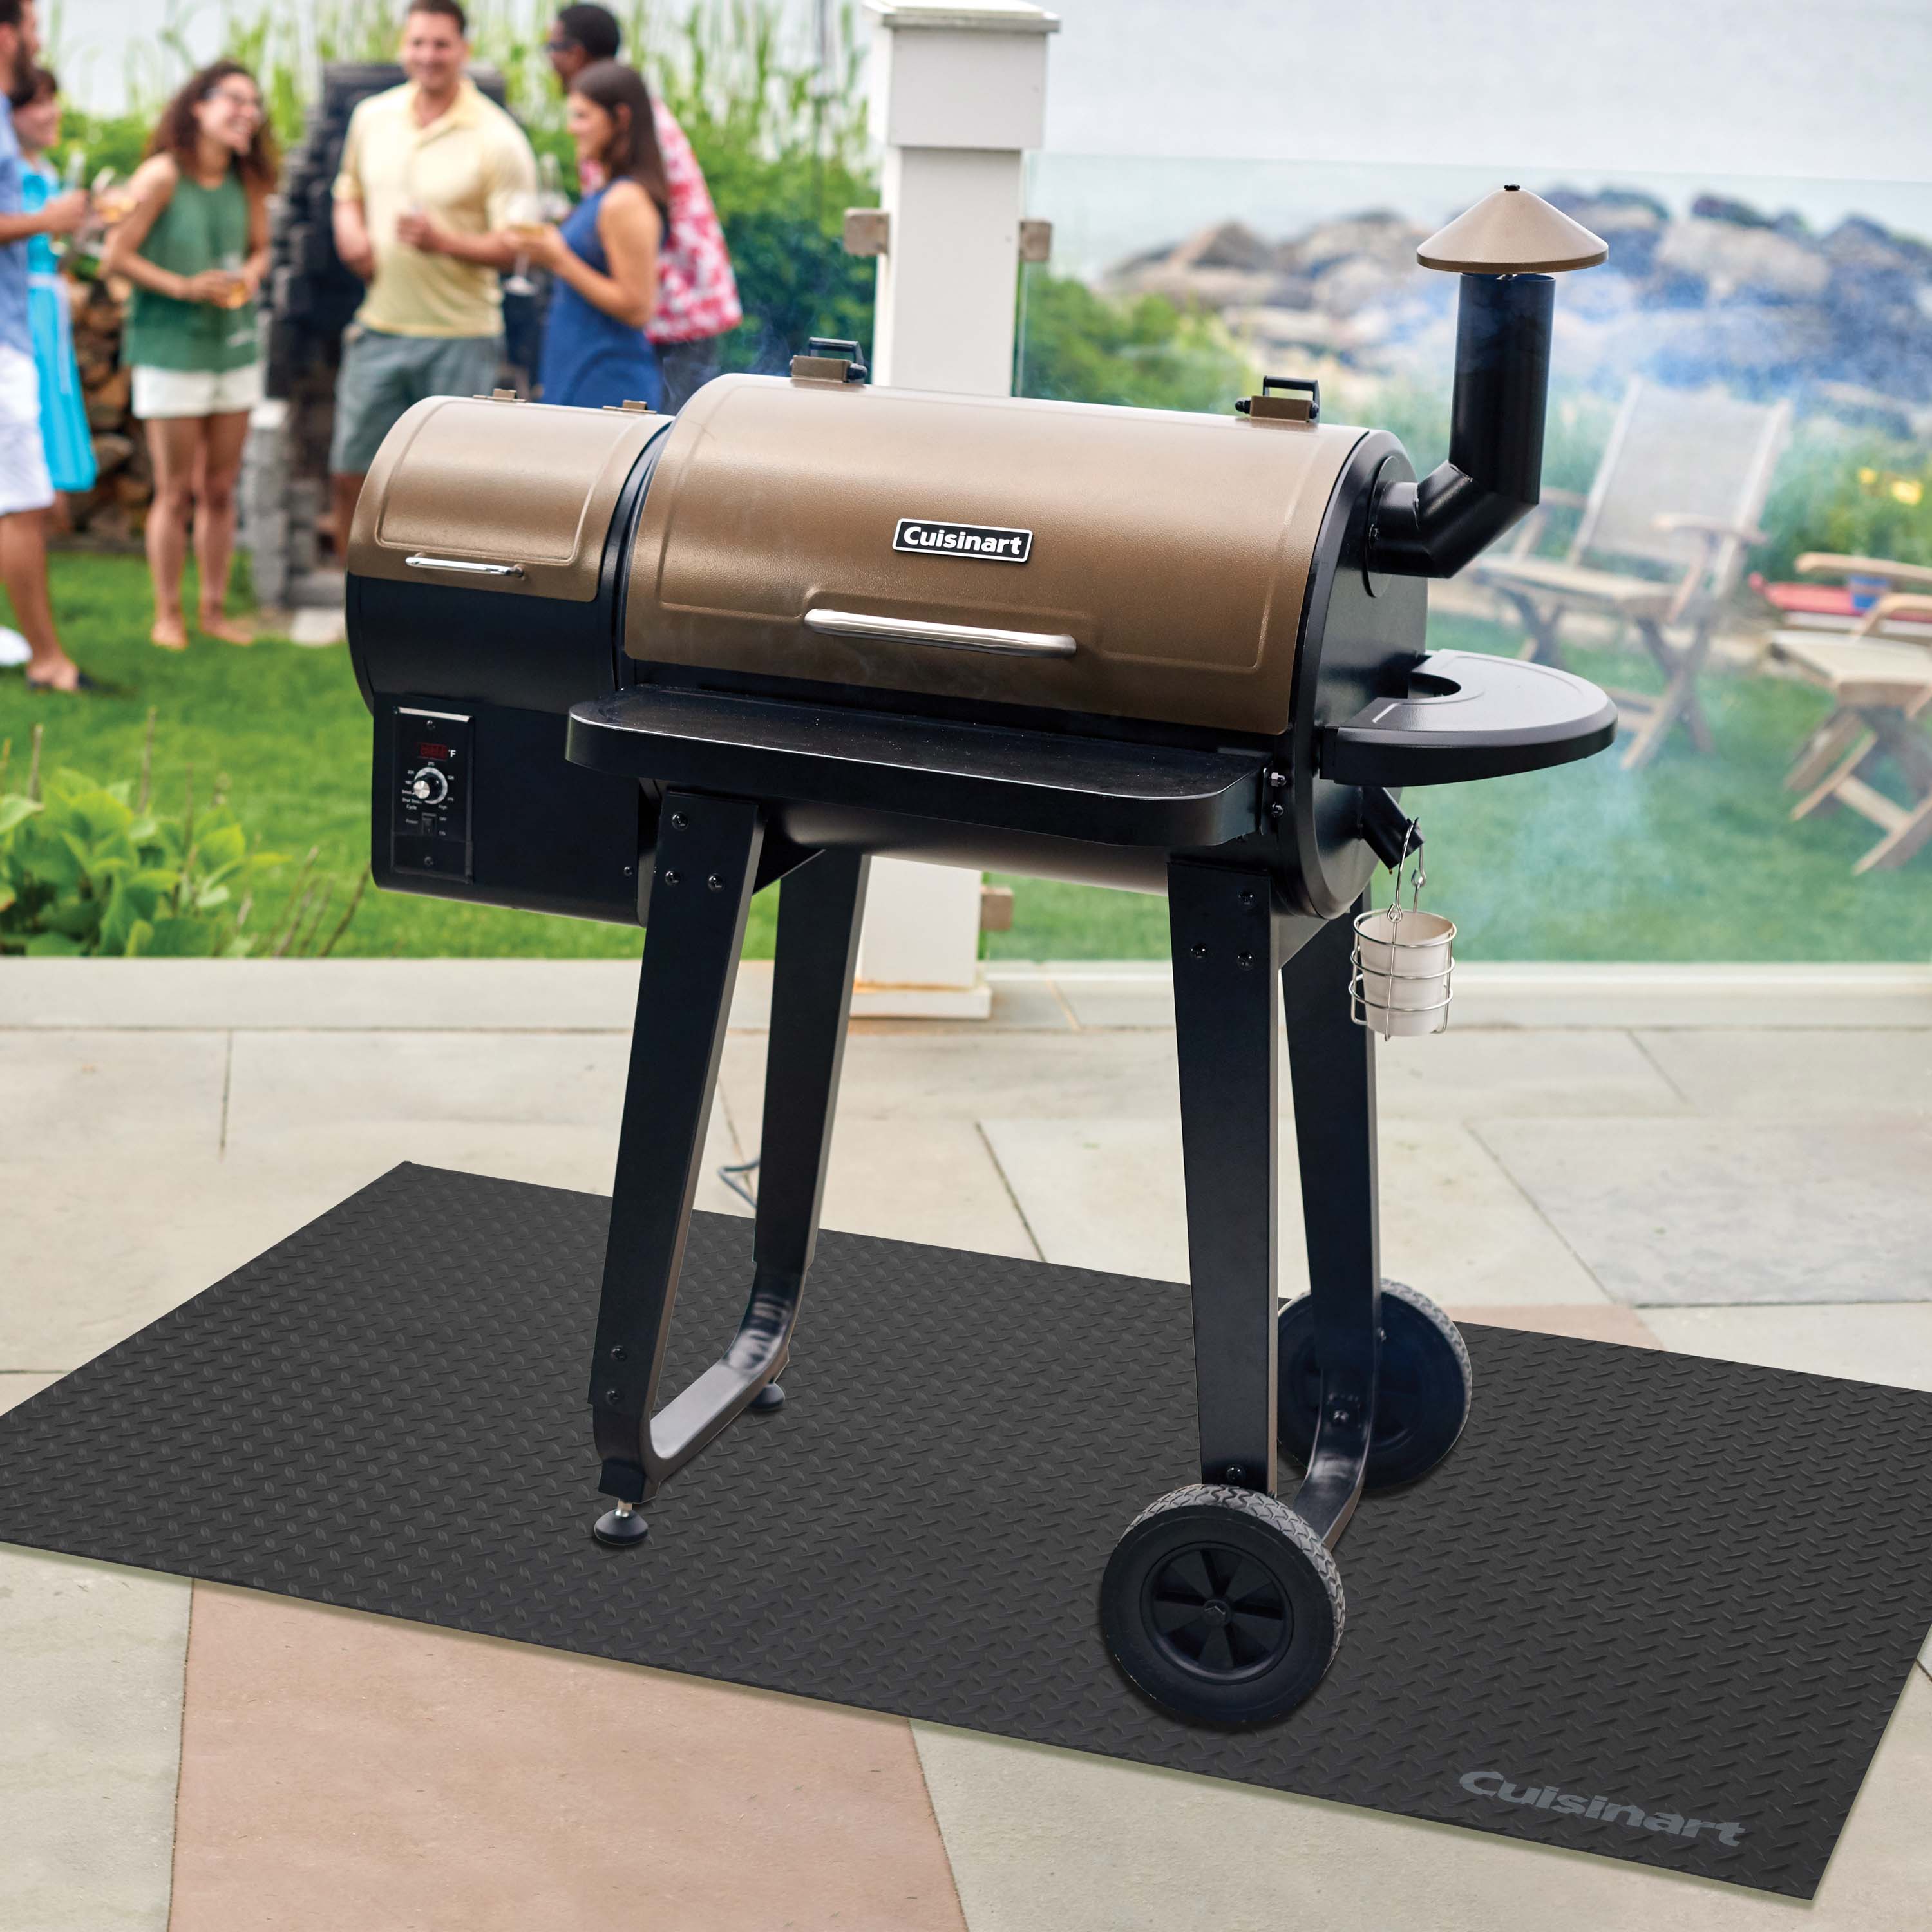 Cuisinart 65-In. x 36-In. Premium Deck and Patio Grill Mat, Black - image 4 of 7